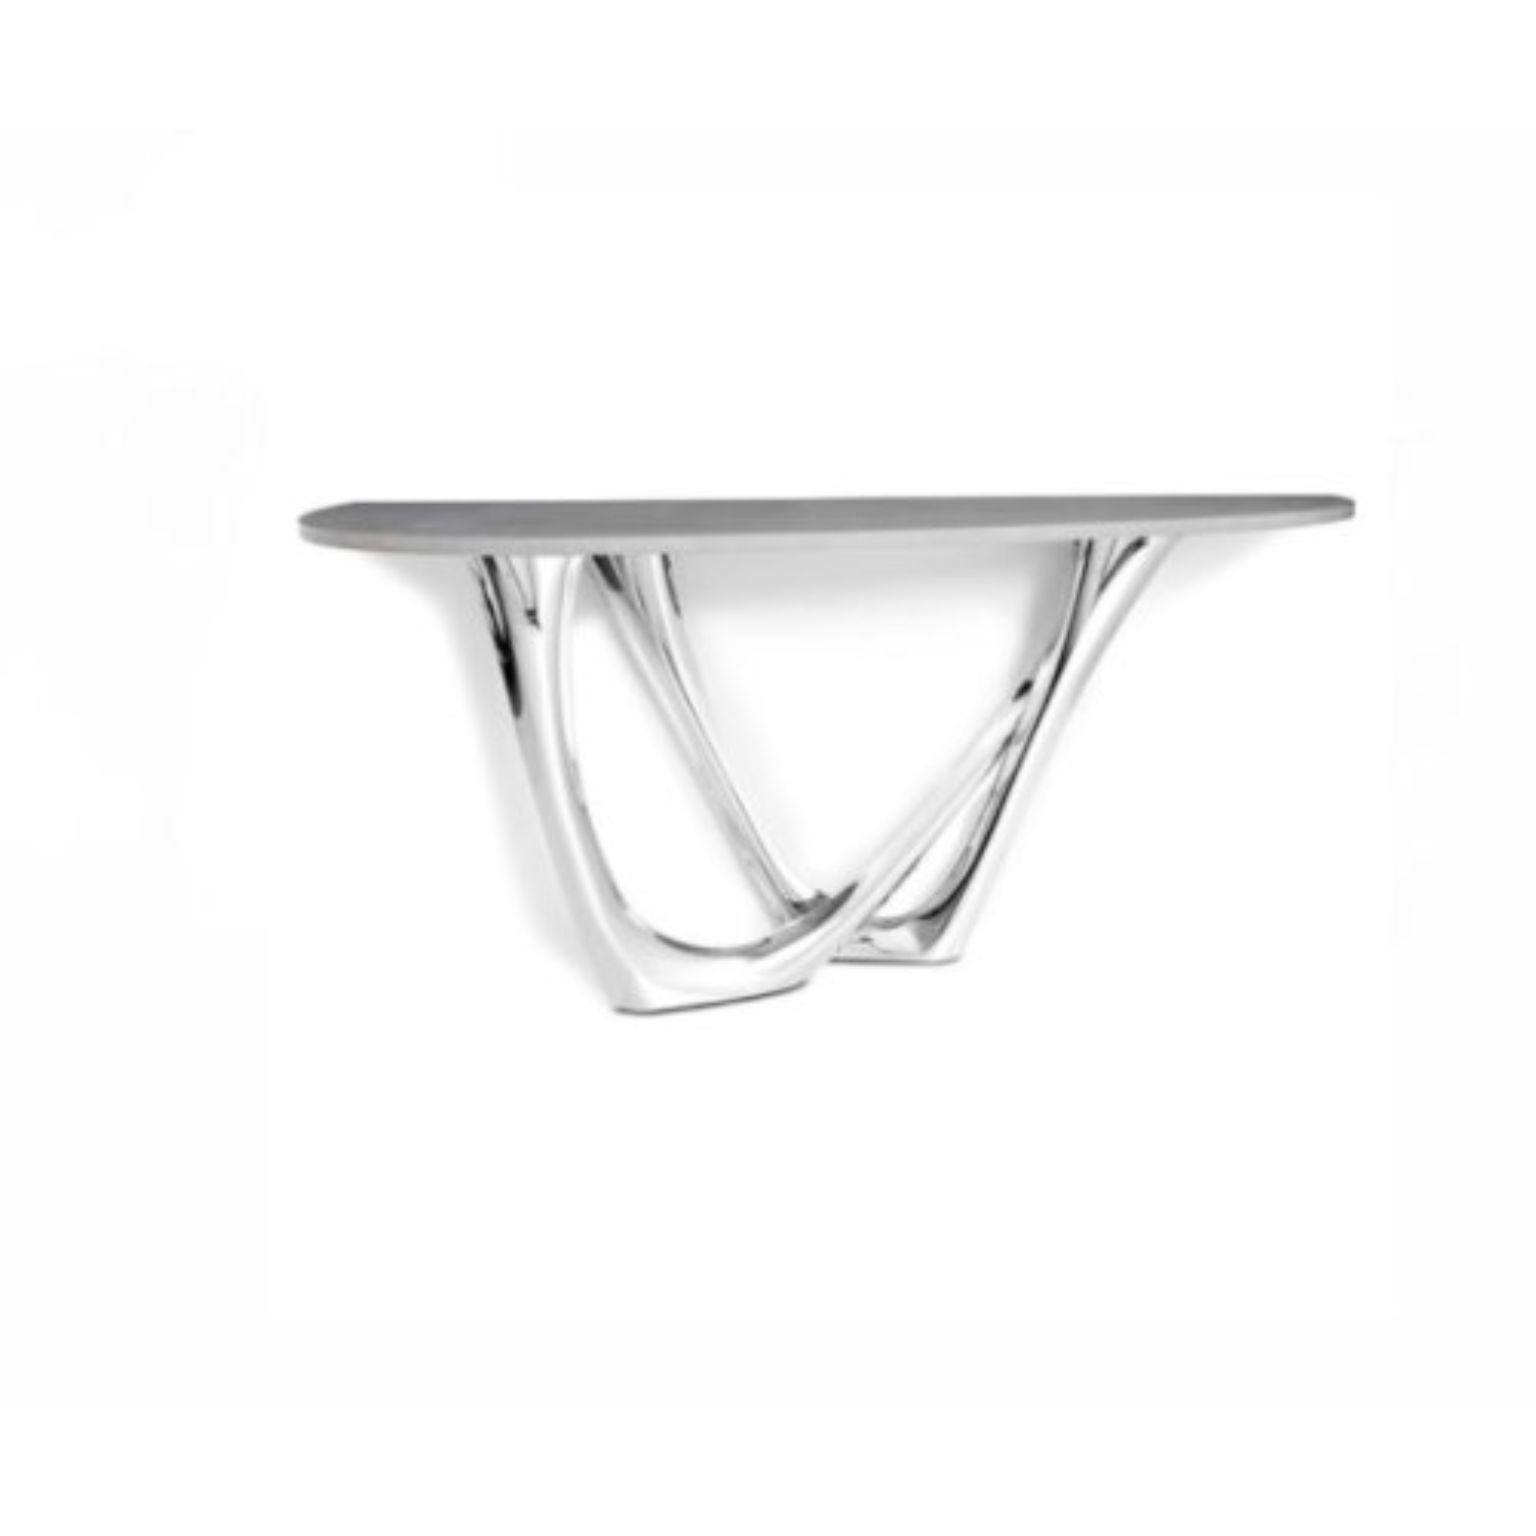 Organic Modern Umbra Grey G-Console Duo Concrete Top and Steel Base by Zieta For Sale